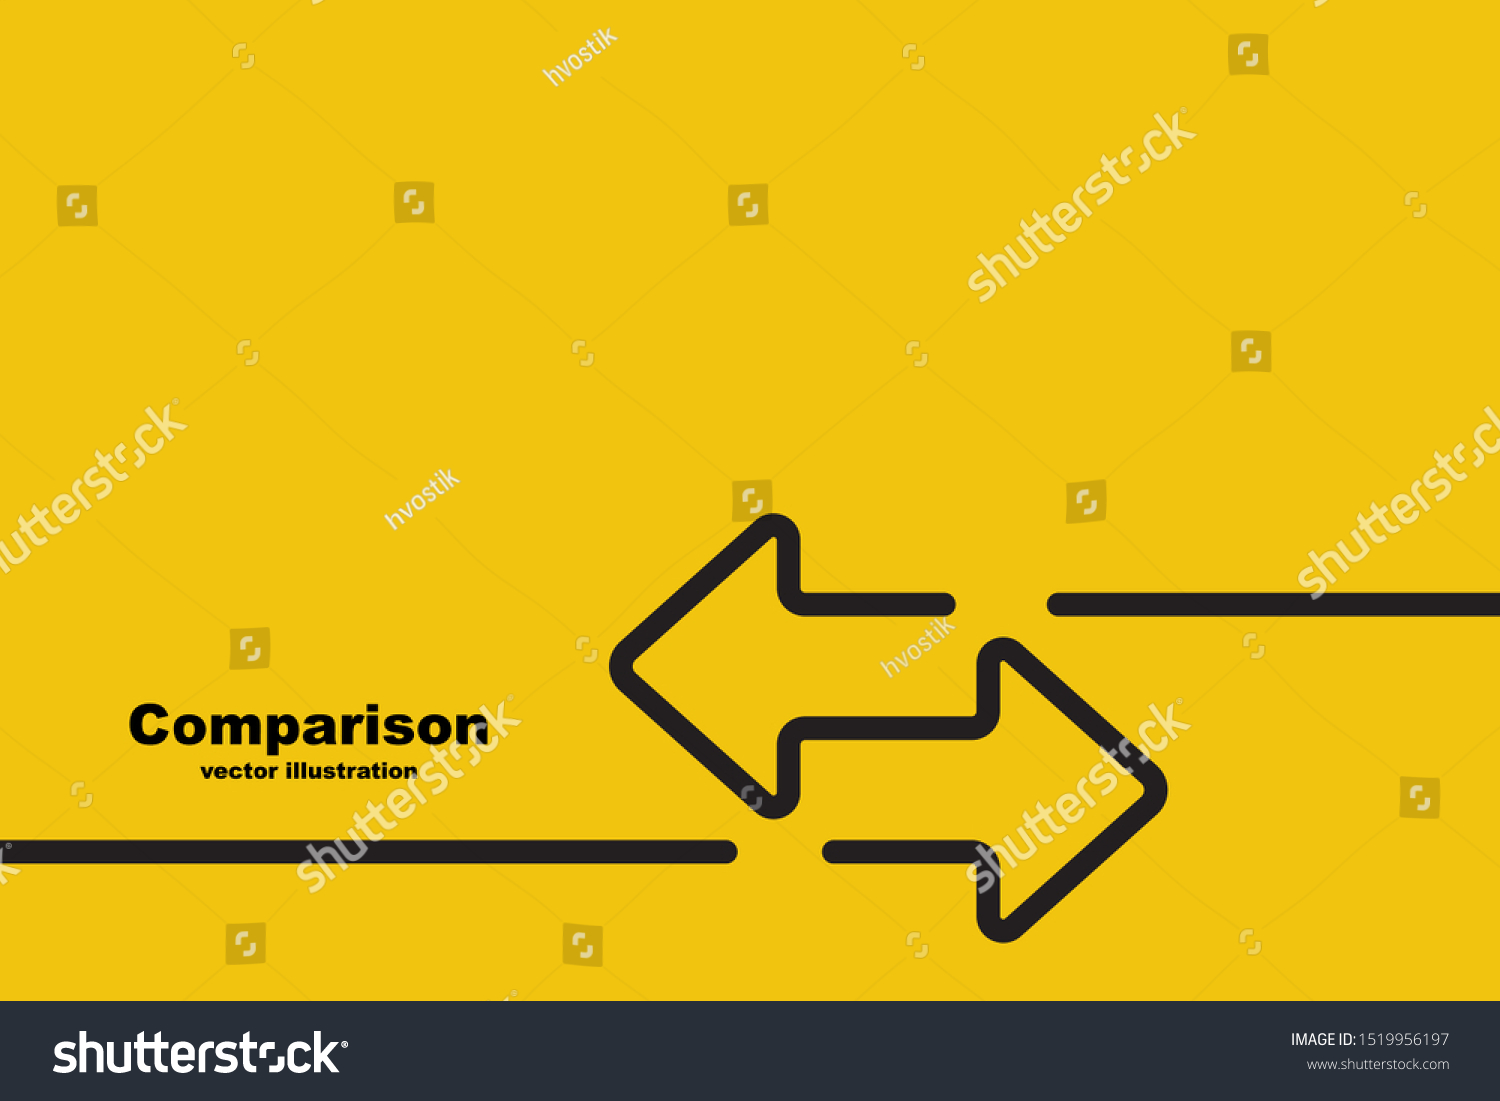 Two arrows are directed in different directions. Template comparison black line design. Confrontation logo. Glyph icon isolated on yellow background. Vector illustration flat style.  #1519956197